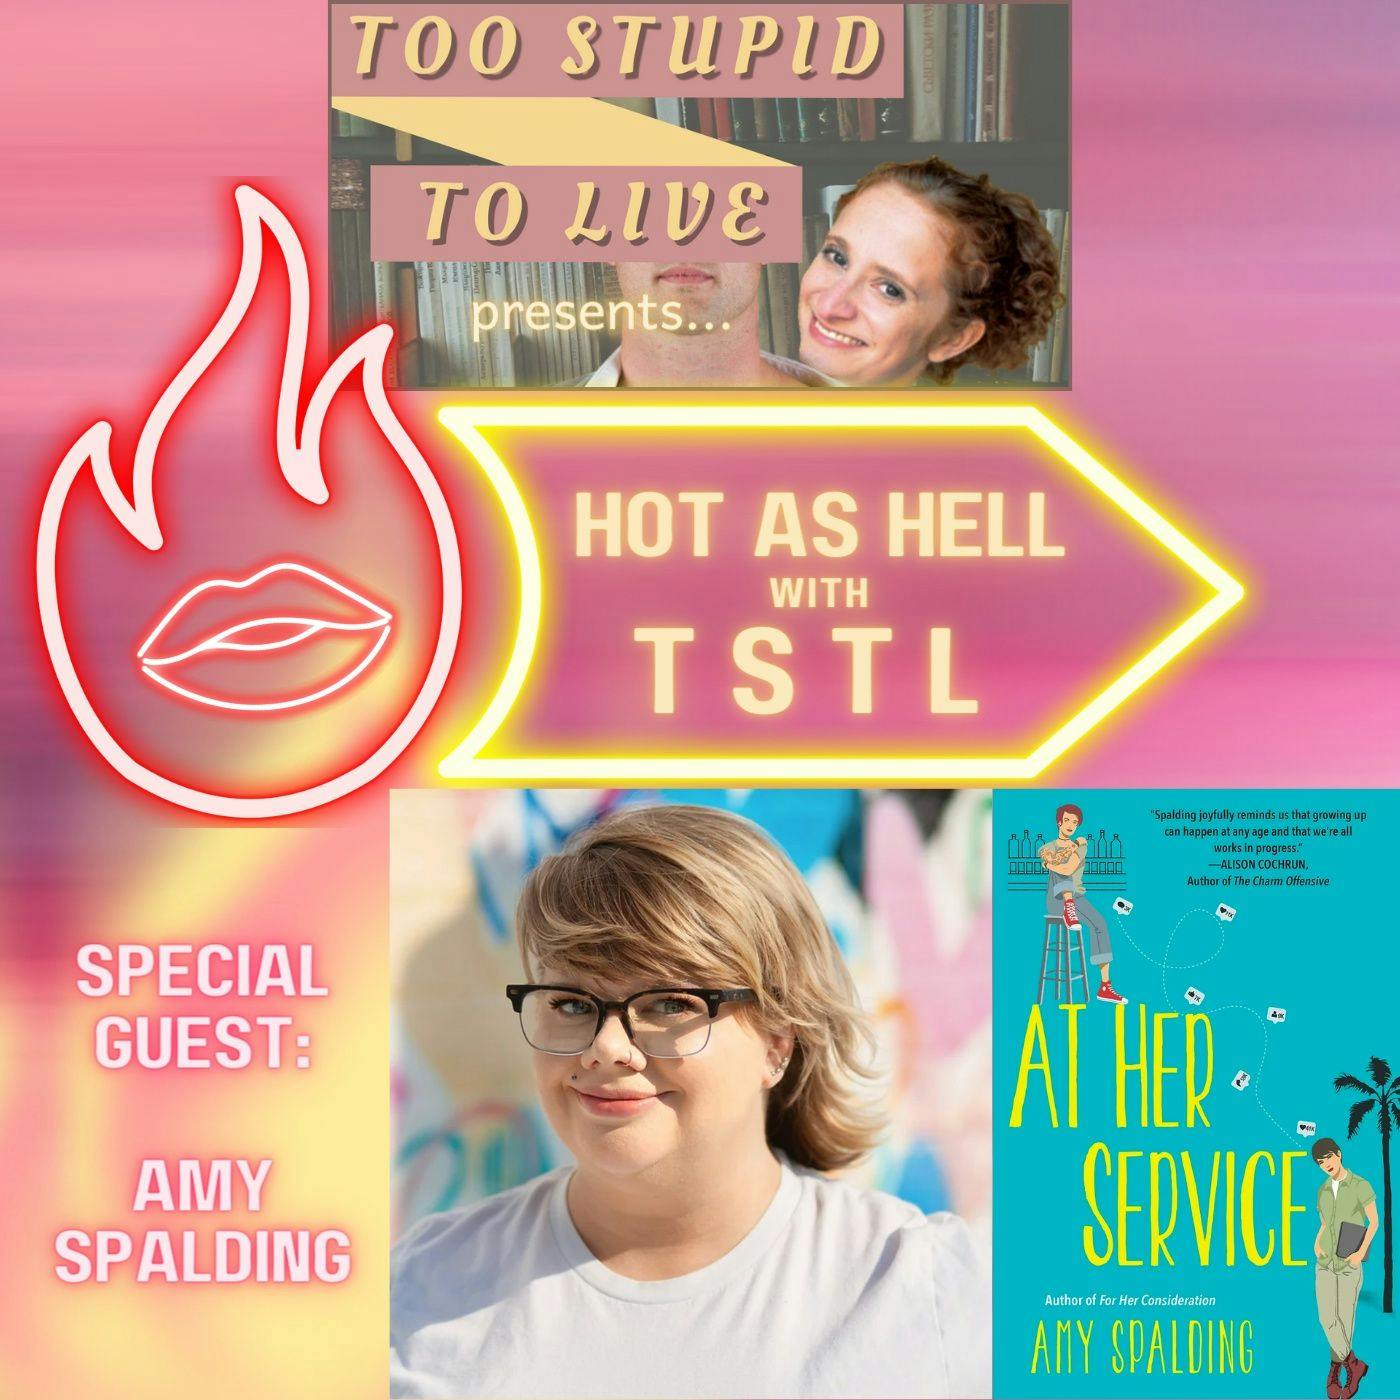 Hot as HELL with TSTL - Amy Spalding at YOUR Service!